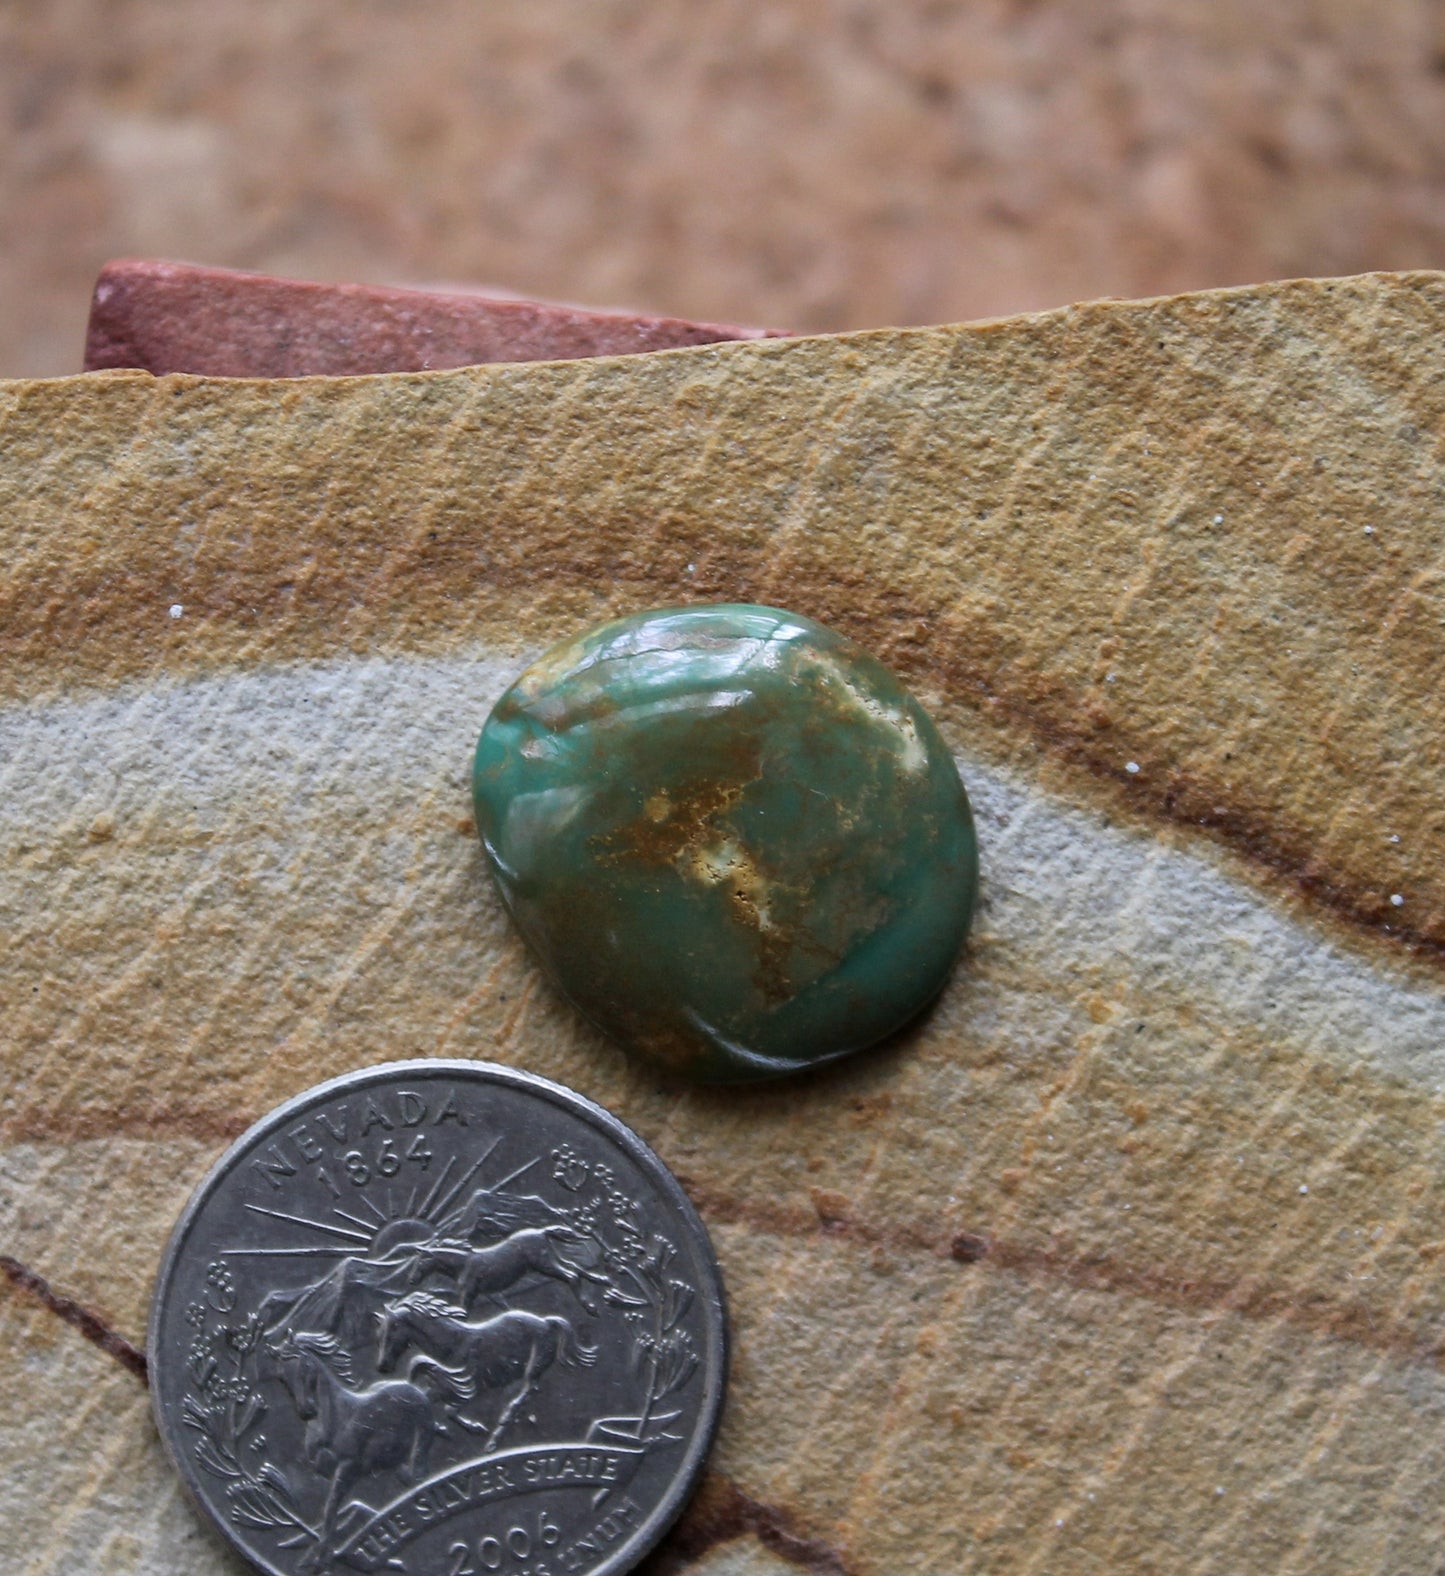 12 carat green turquoise cabochon from Stone Mountain Mine